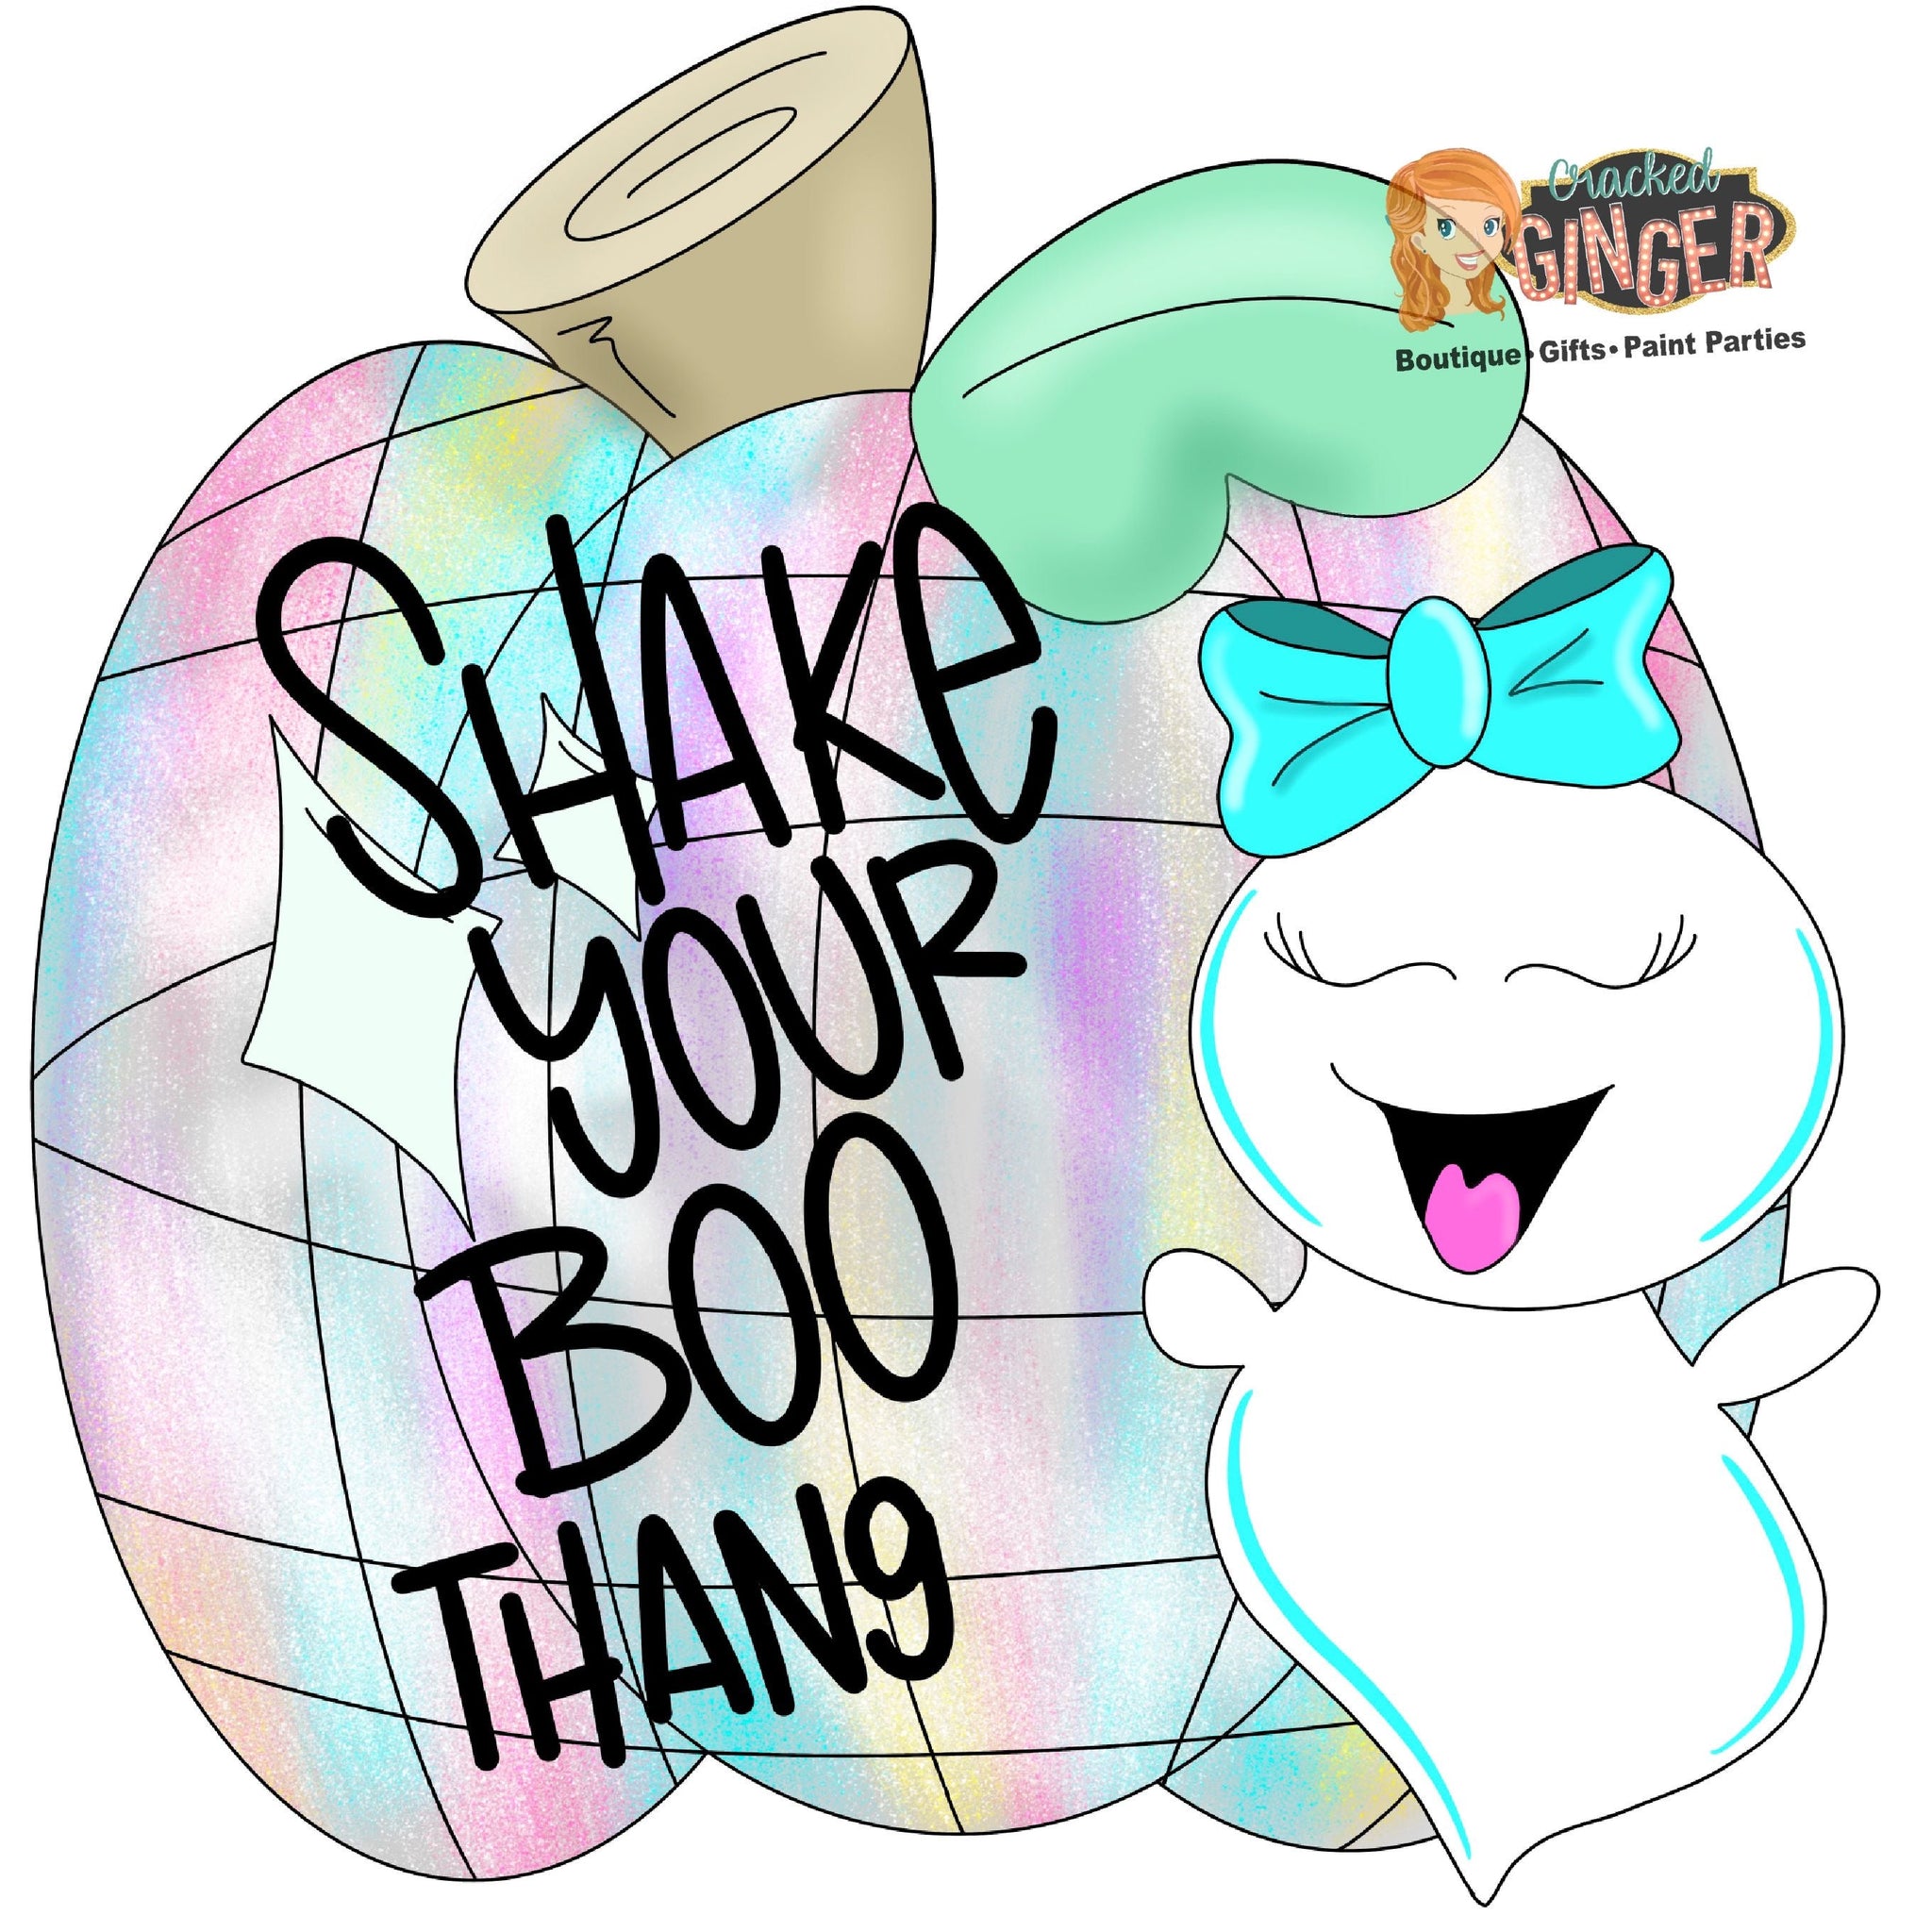 Disco Ghost Shake Your Boo Thang Cutout and Kits